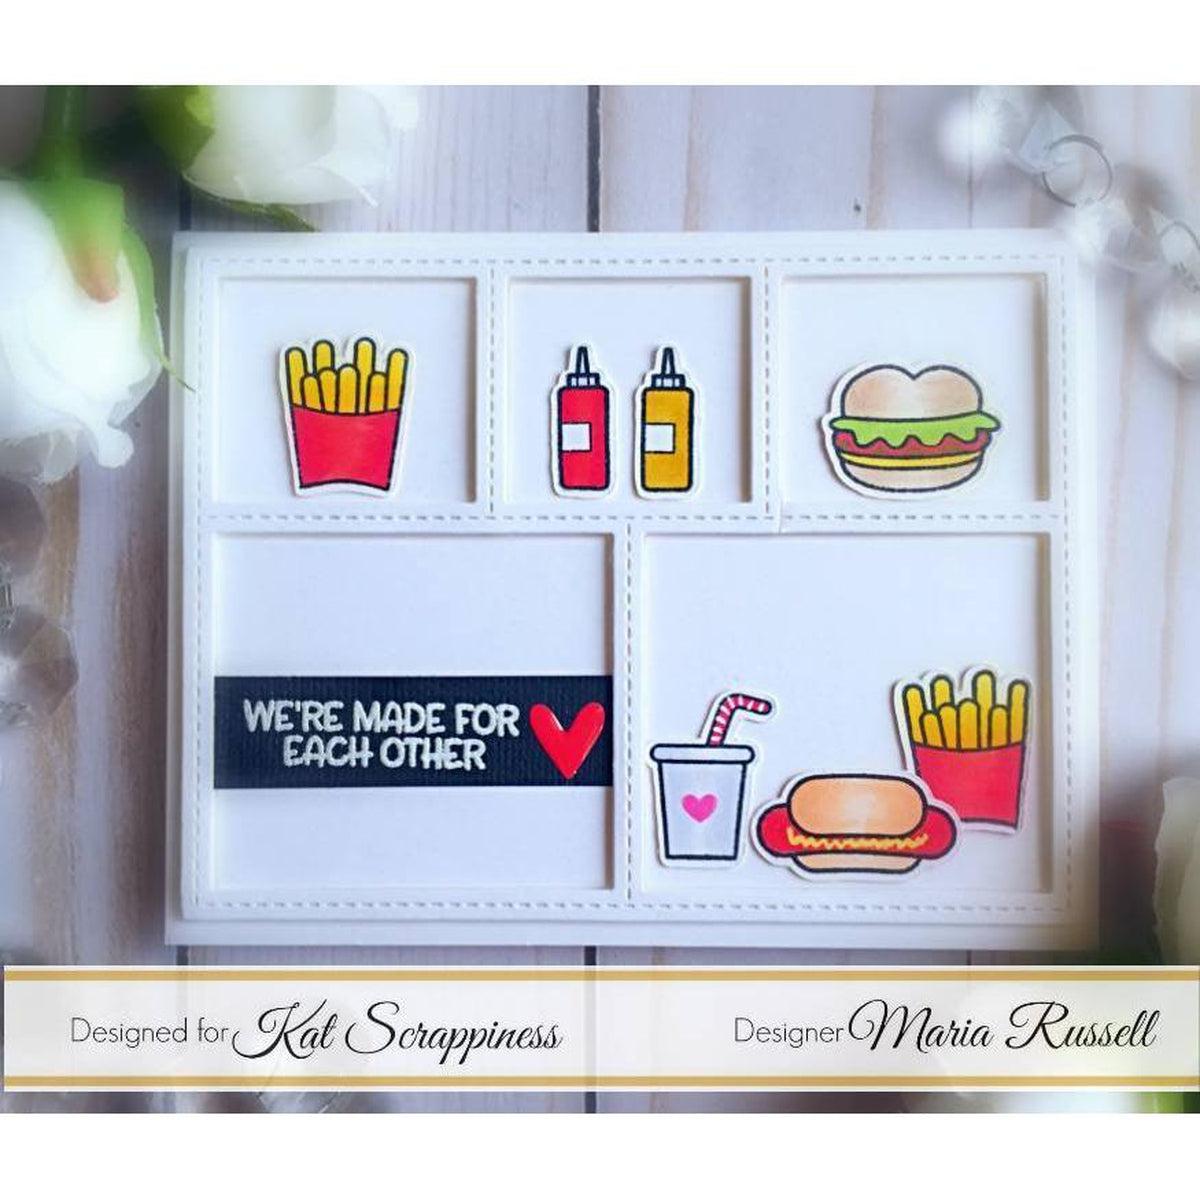 Punny Snacks Stamp Set by Kat Scrappiness - Kat Scrappiness